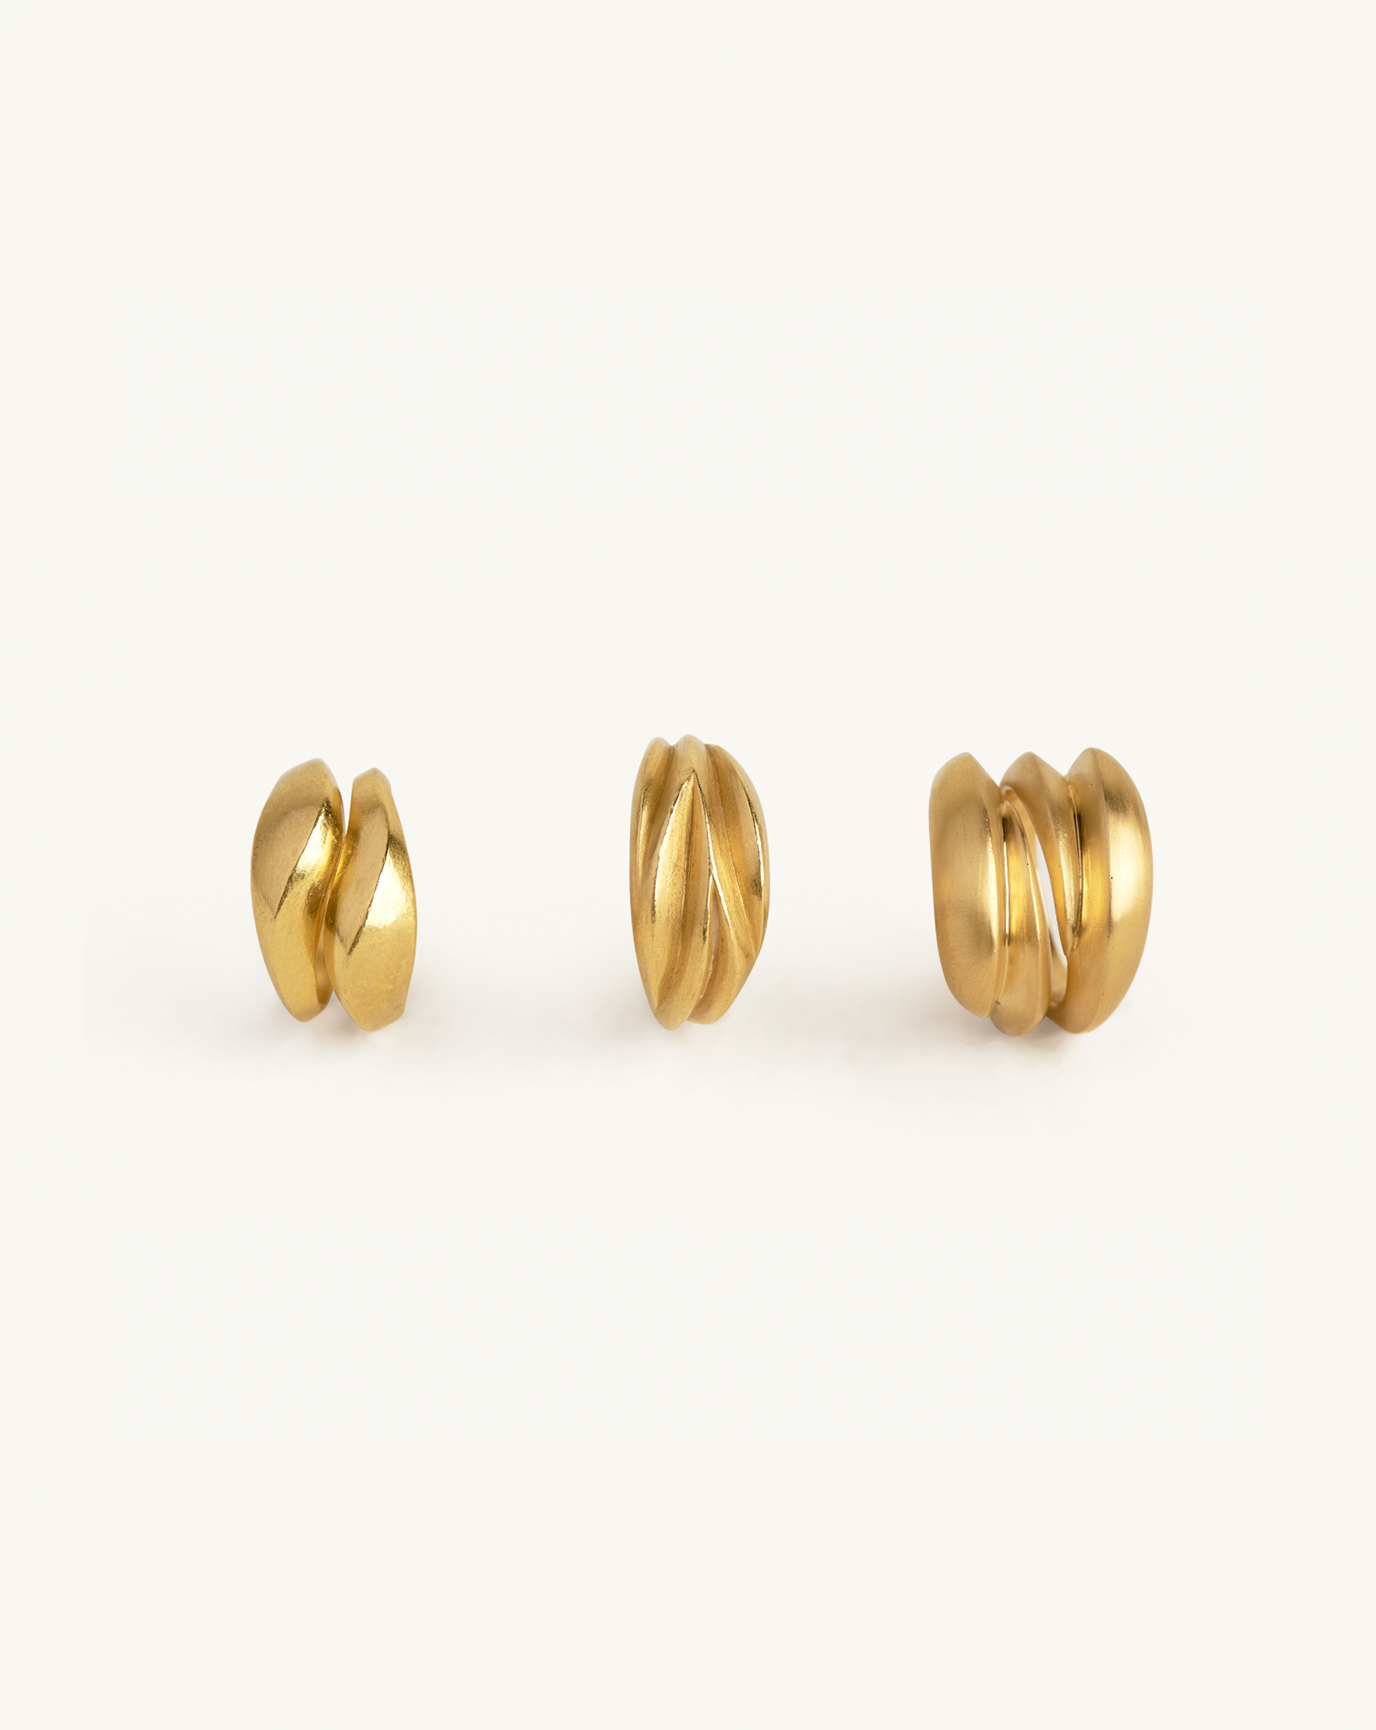 Group product image of the three sculptural rings in gold